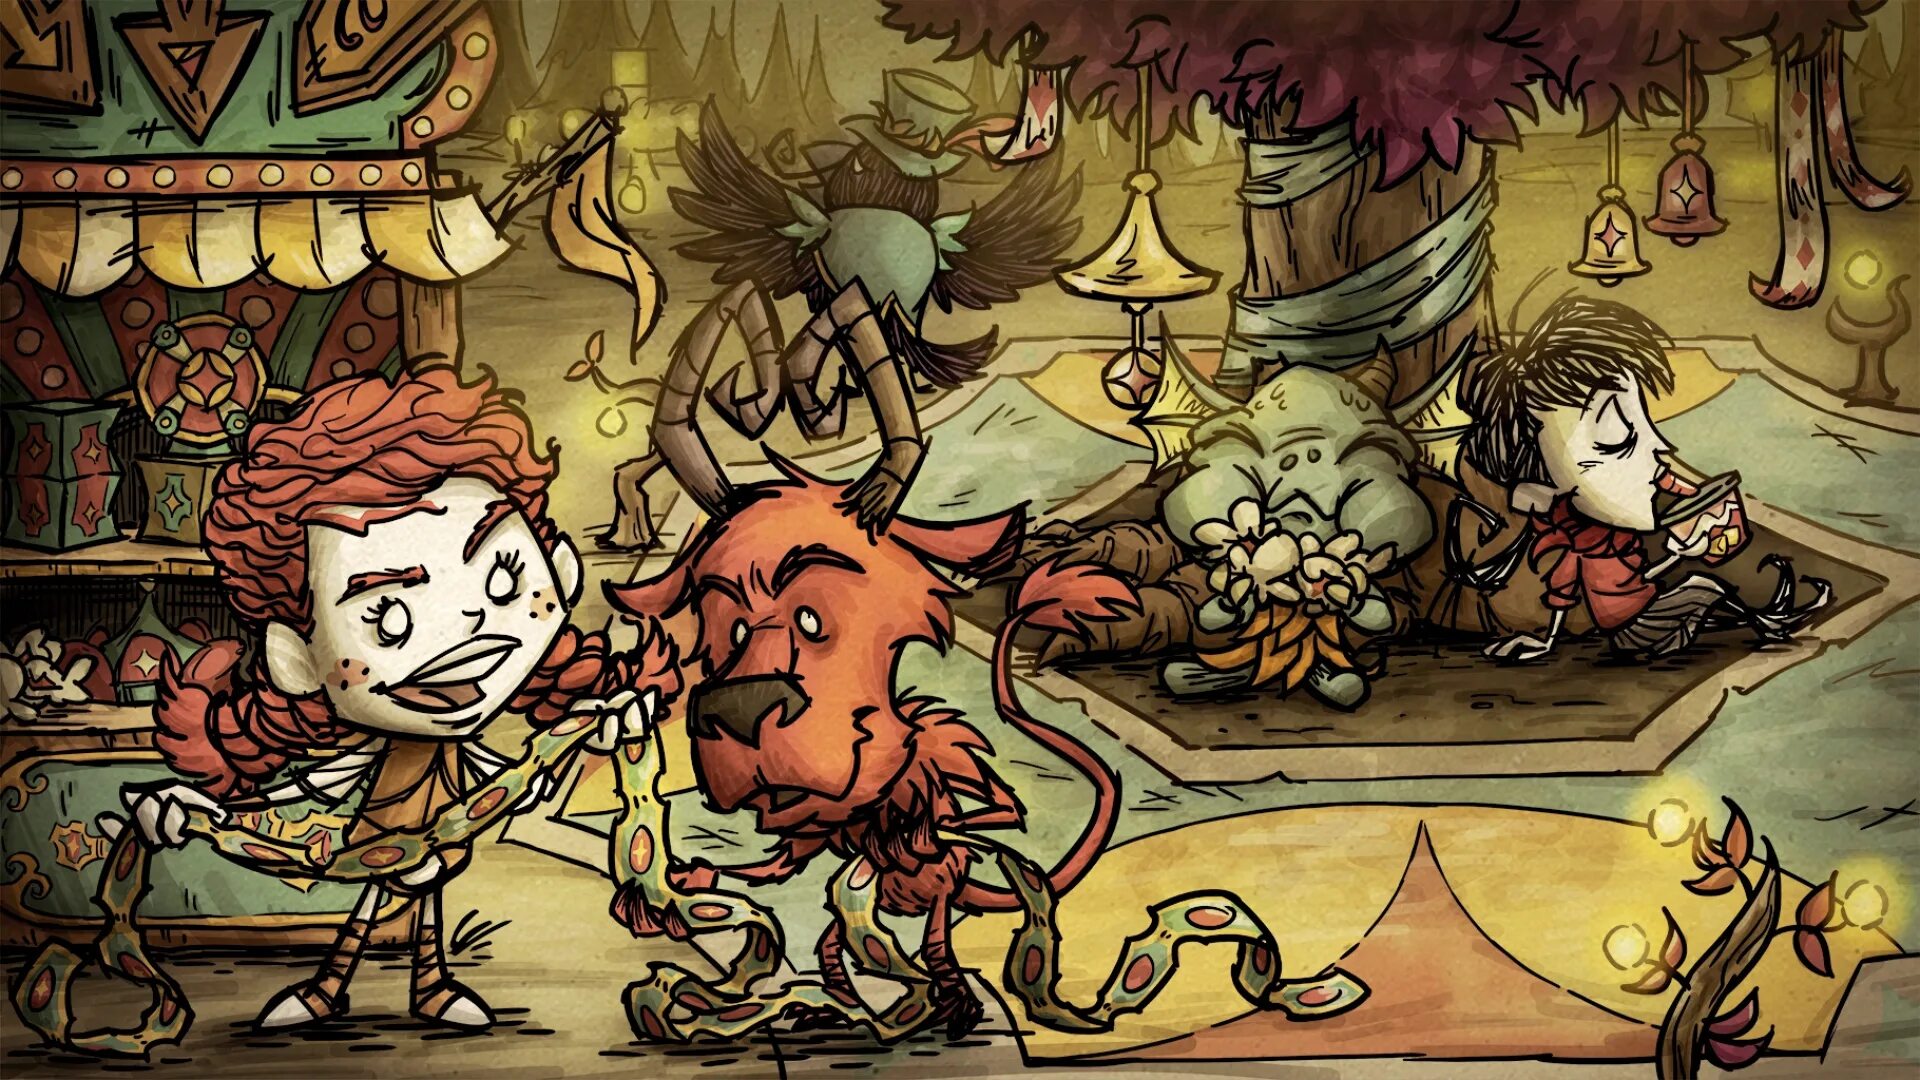 Don't Starve игра. Don't Starve together карнавал. Донт старв 3. Don't Starve together игрушки.